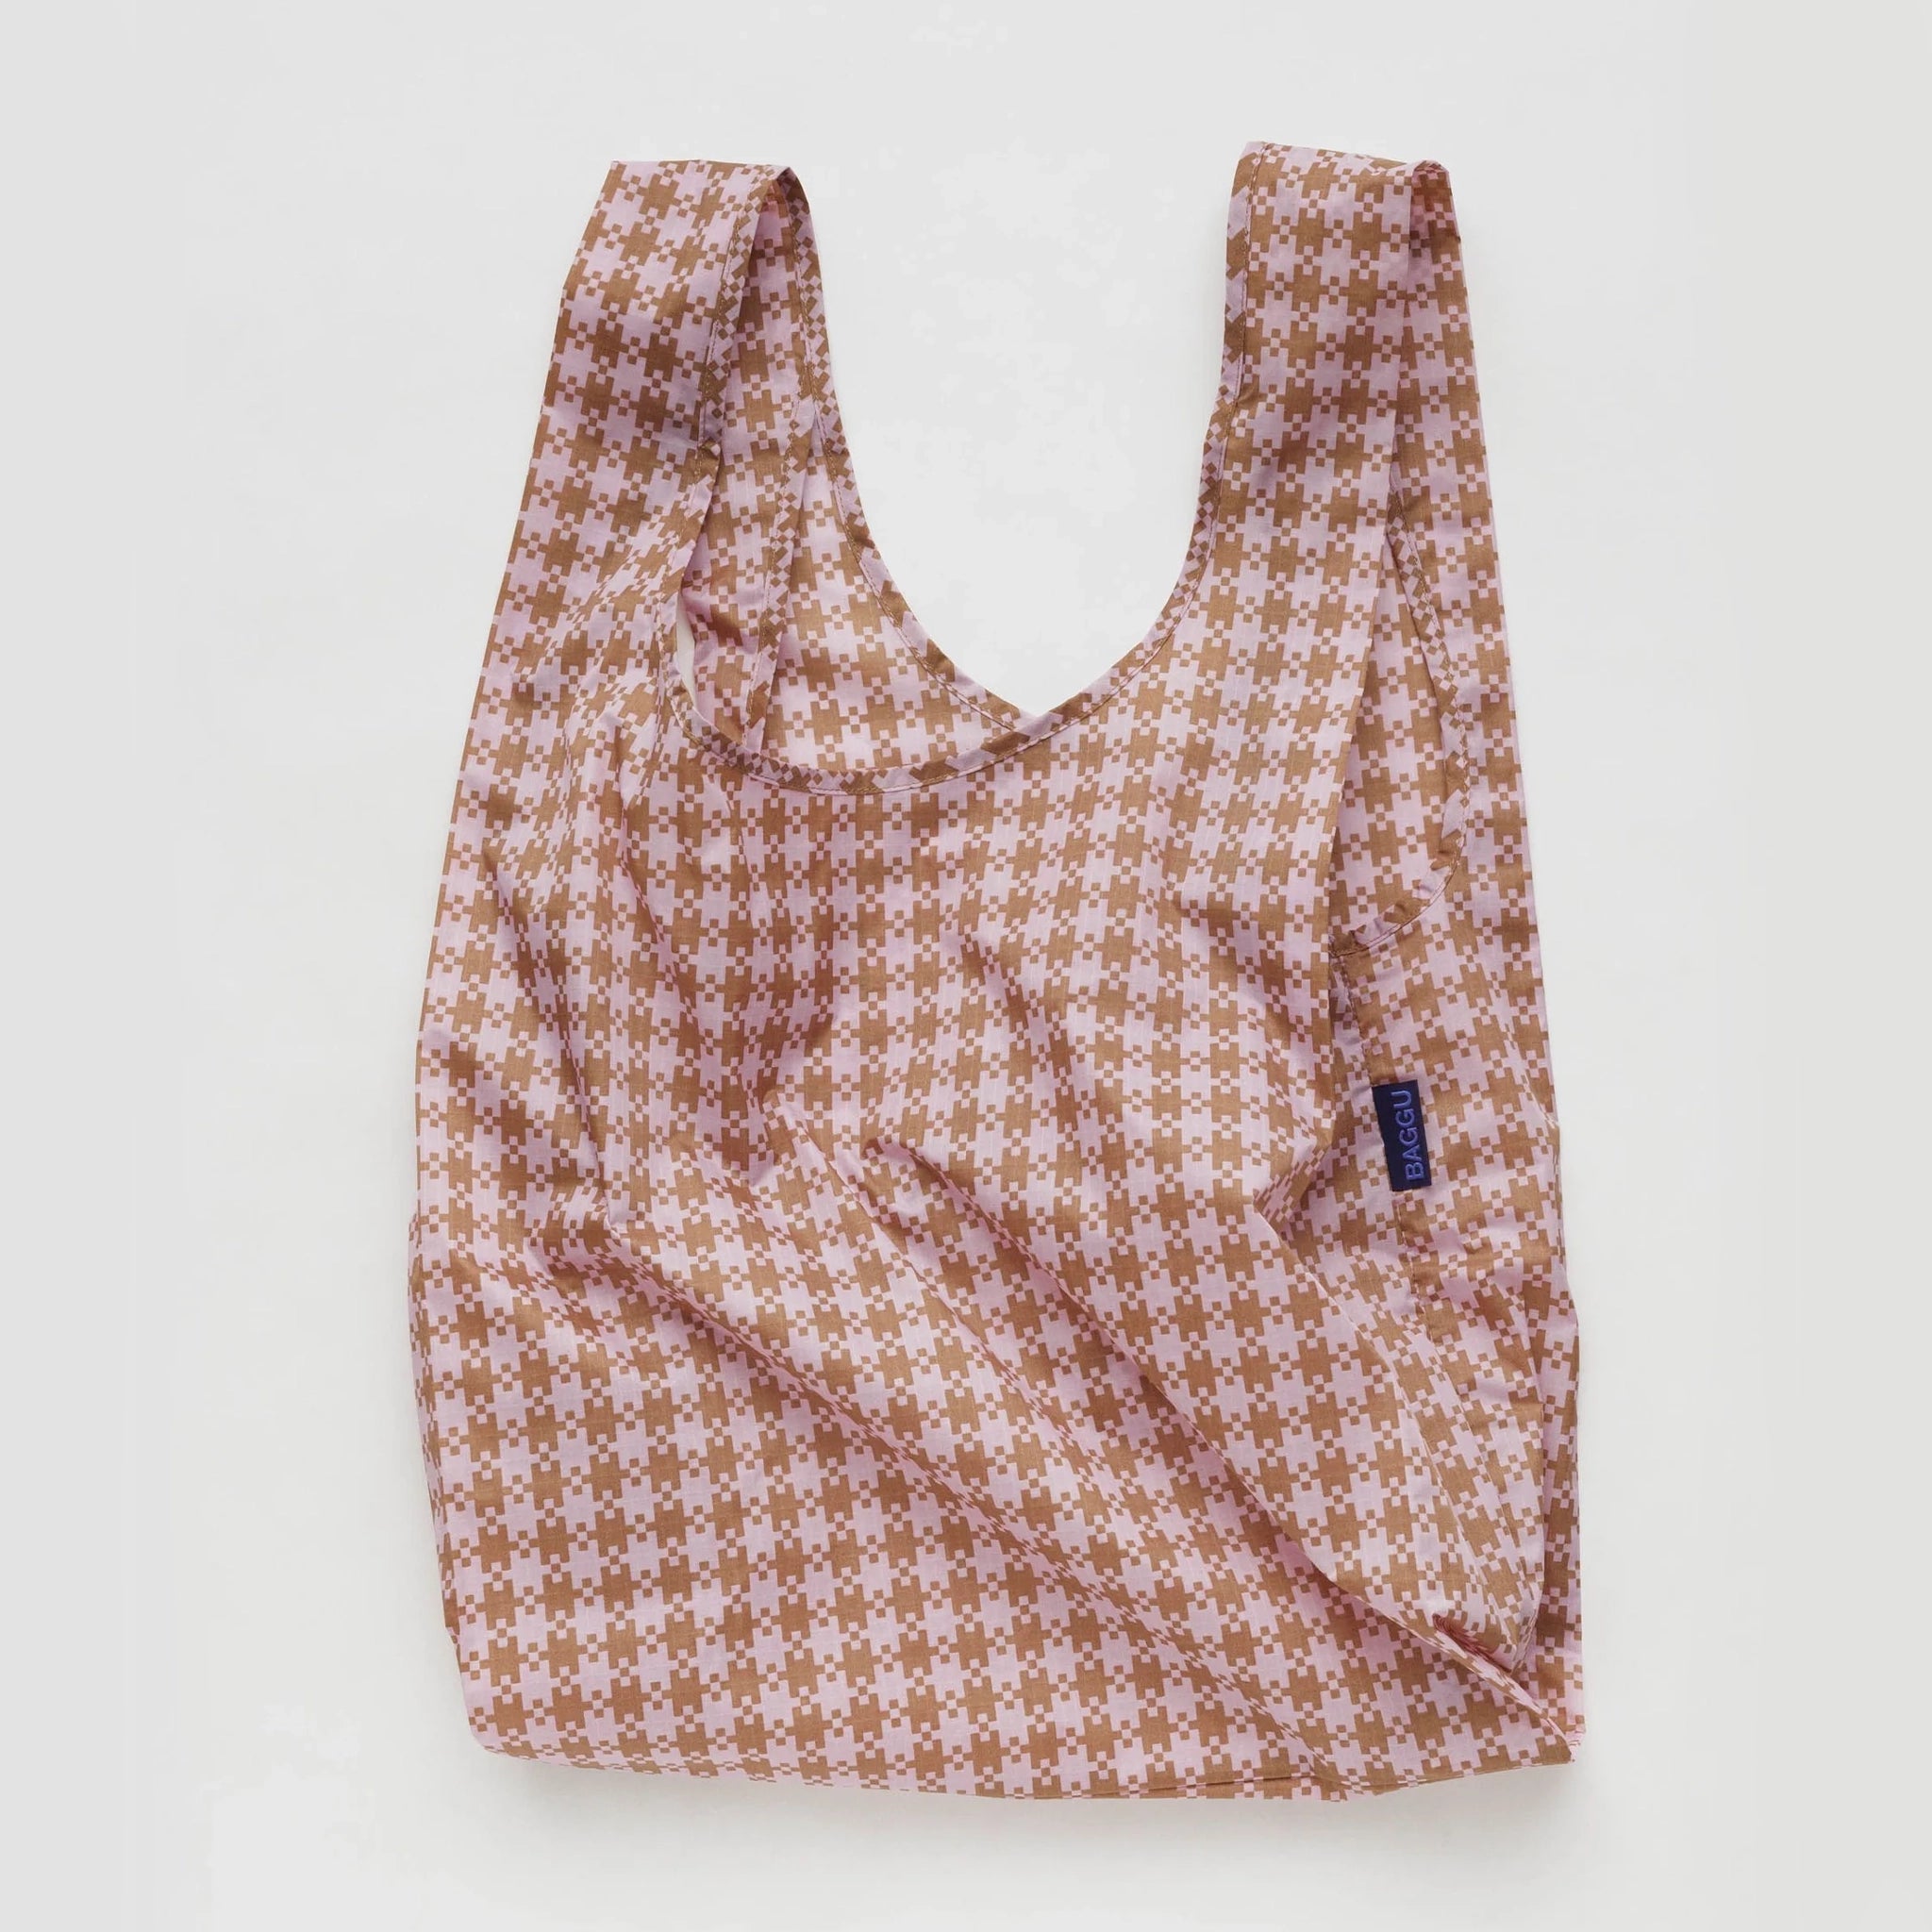 On a white background is a rose colored reusable tote with a gingham print all over. 